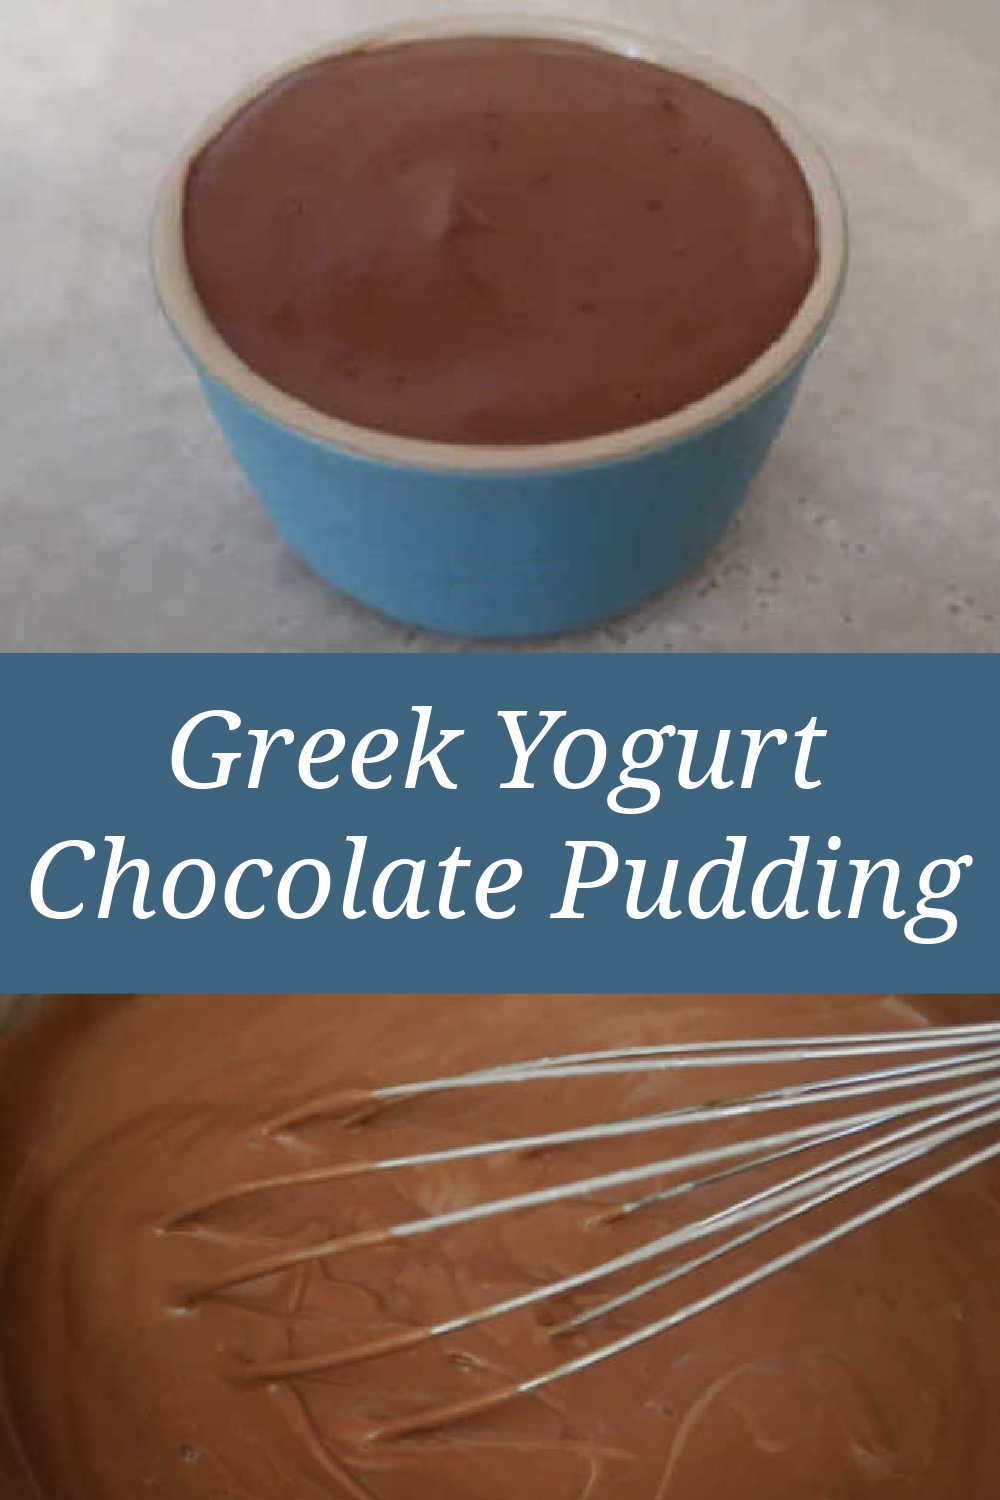 Greek Yogurt Chocolate Pudding Recipe - how to make an easy and healthy high protein no bake dessert mousse with Greek Yoghurt - with the full video tutorial.